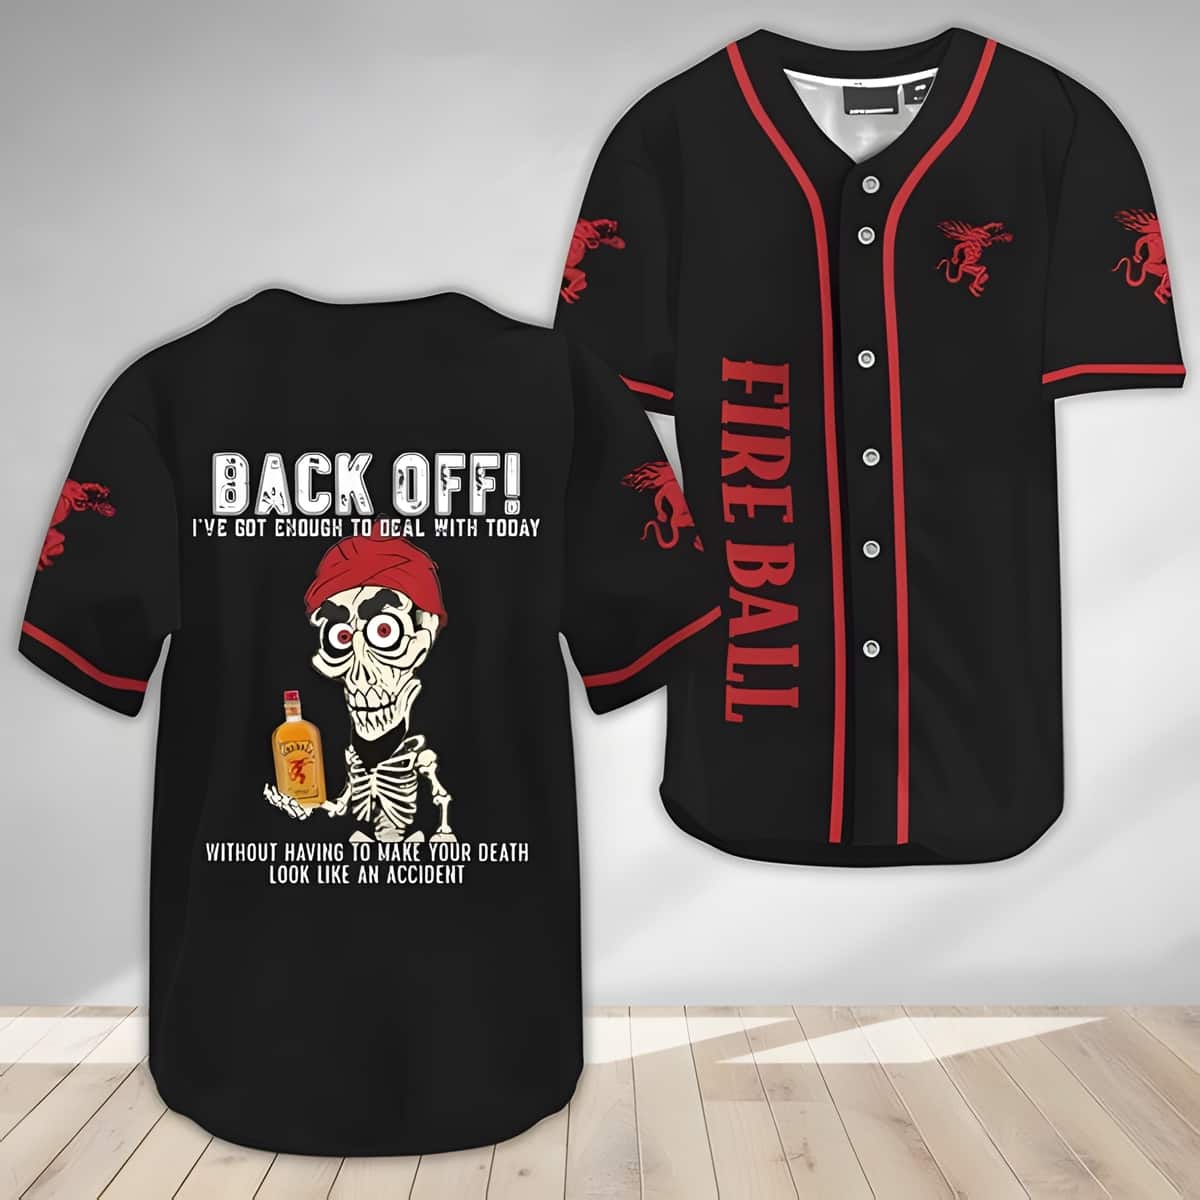 Achmed Back Off With Fireball Baseball Jersey I've Got Enough To Deal With Today Gift For Whisky Lovers